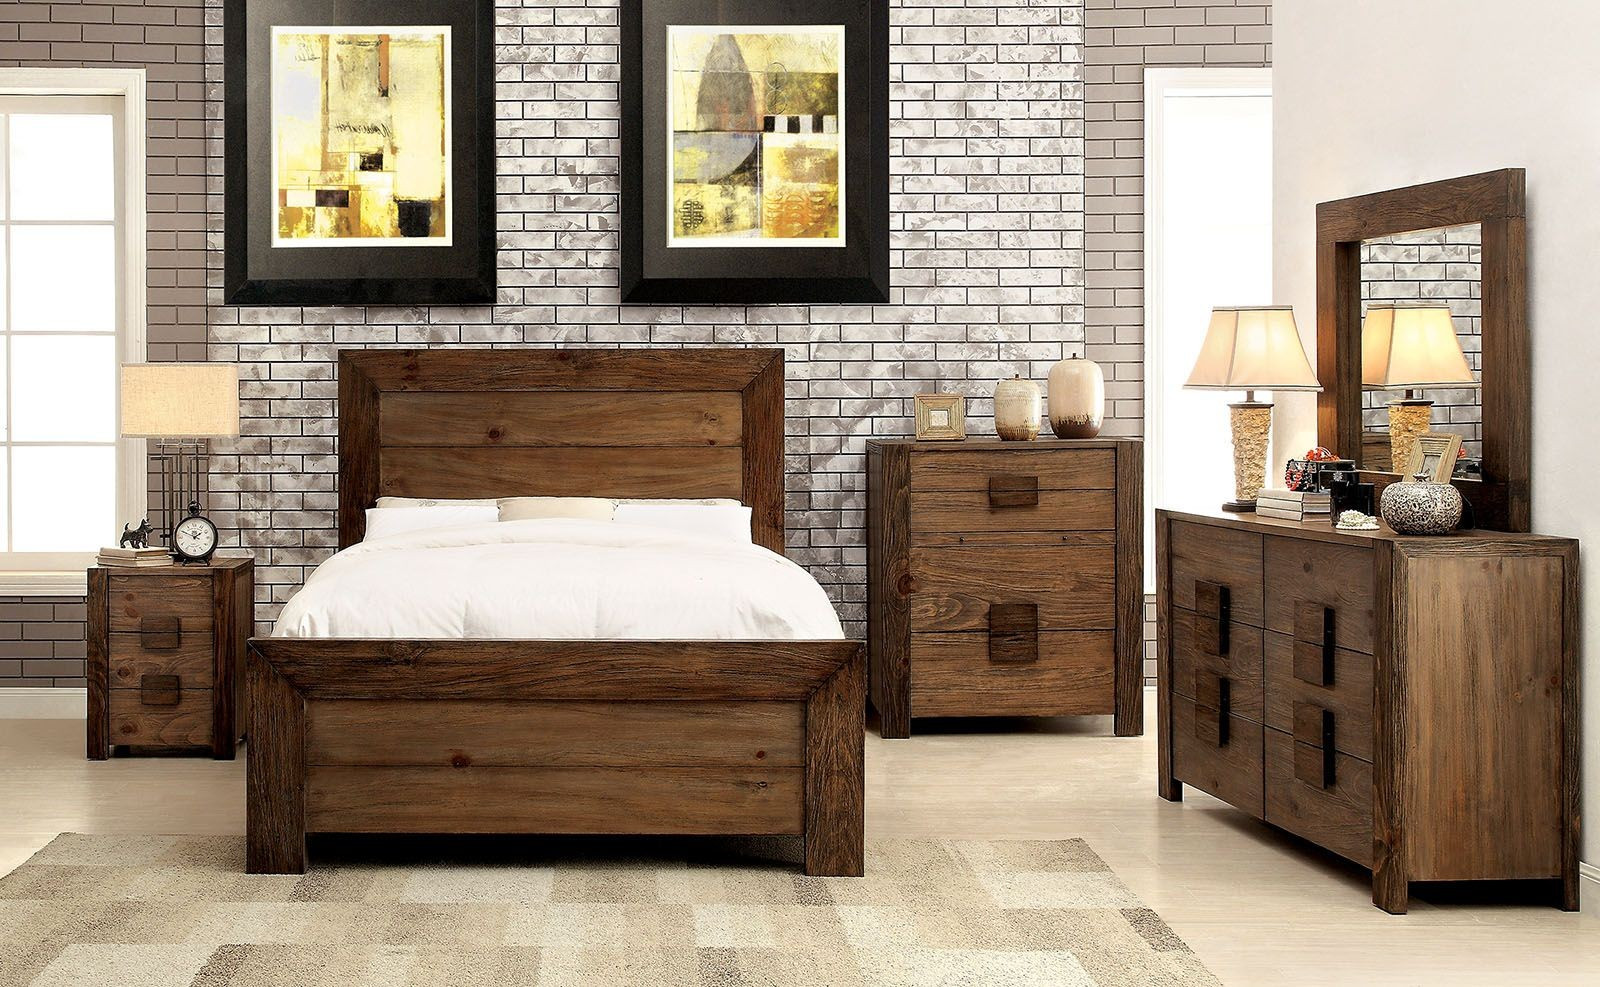 Rustic Wood Bedroom Sets
 Aveiro Rustic Natural Panel Bedroom Set from Furniture of